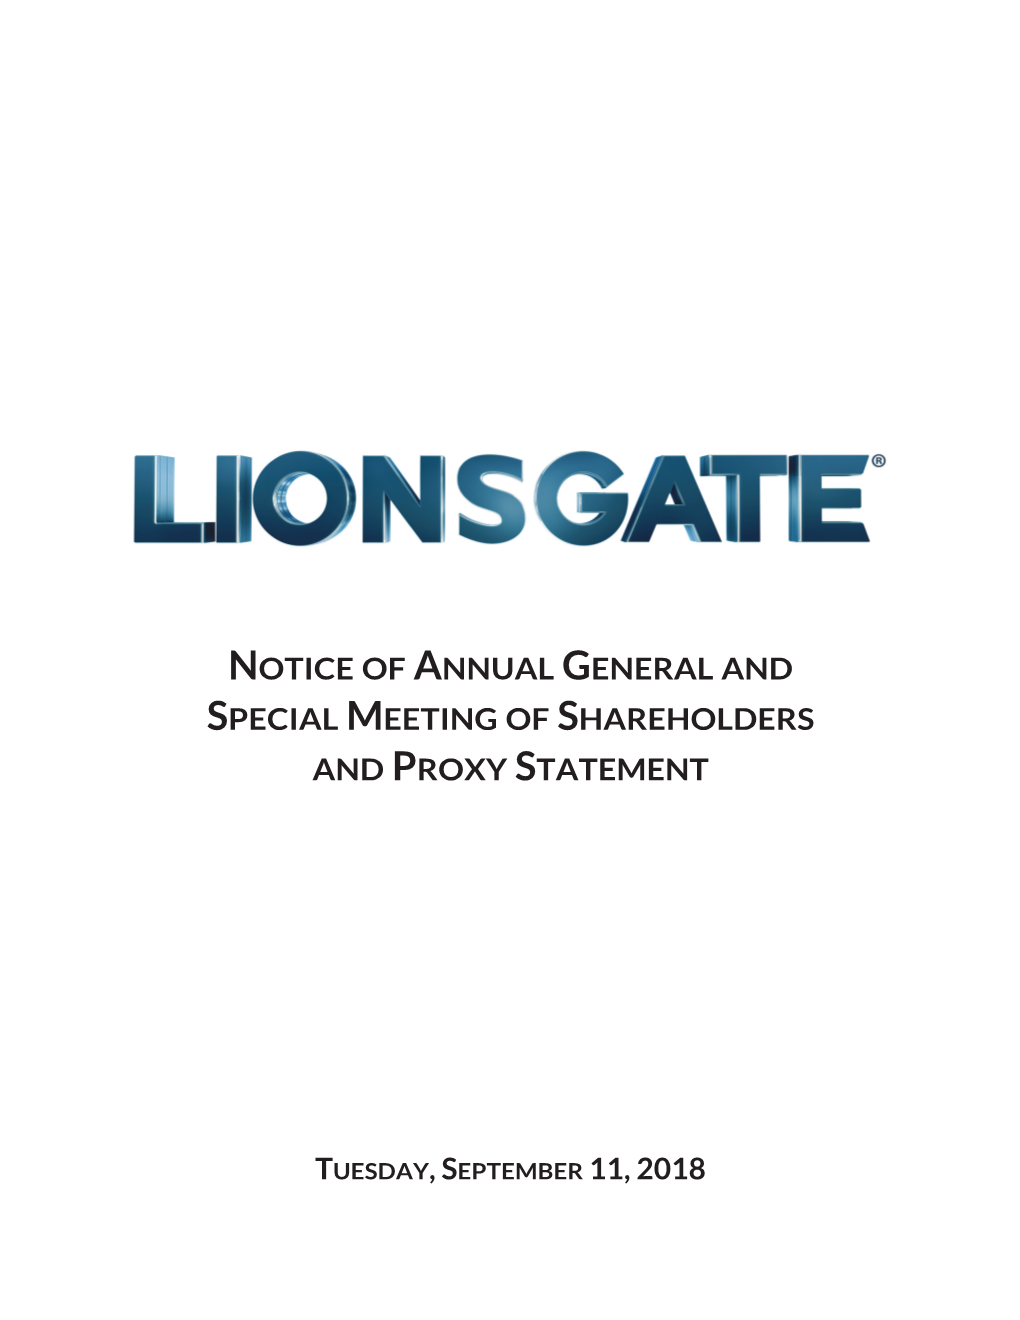 Notice of Annual General and Special Meeting of Shareholders and Proxy Statement